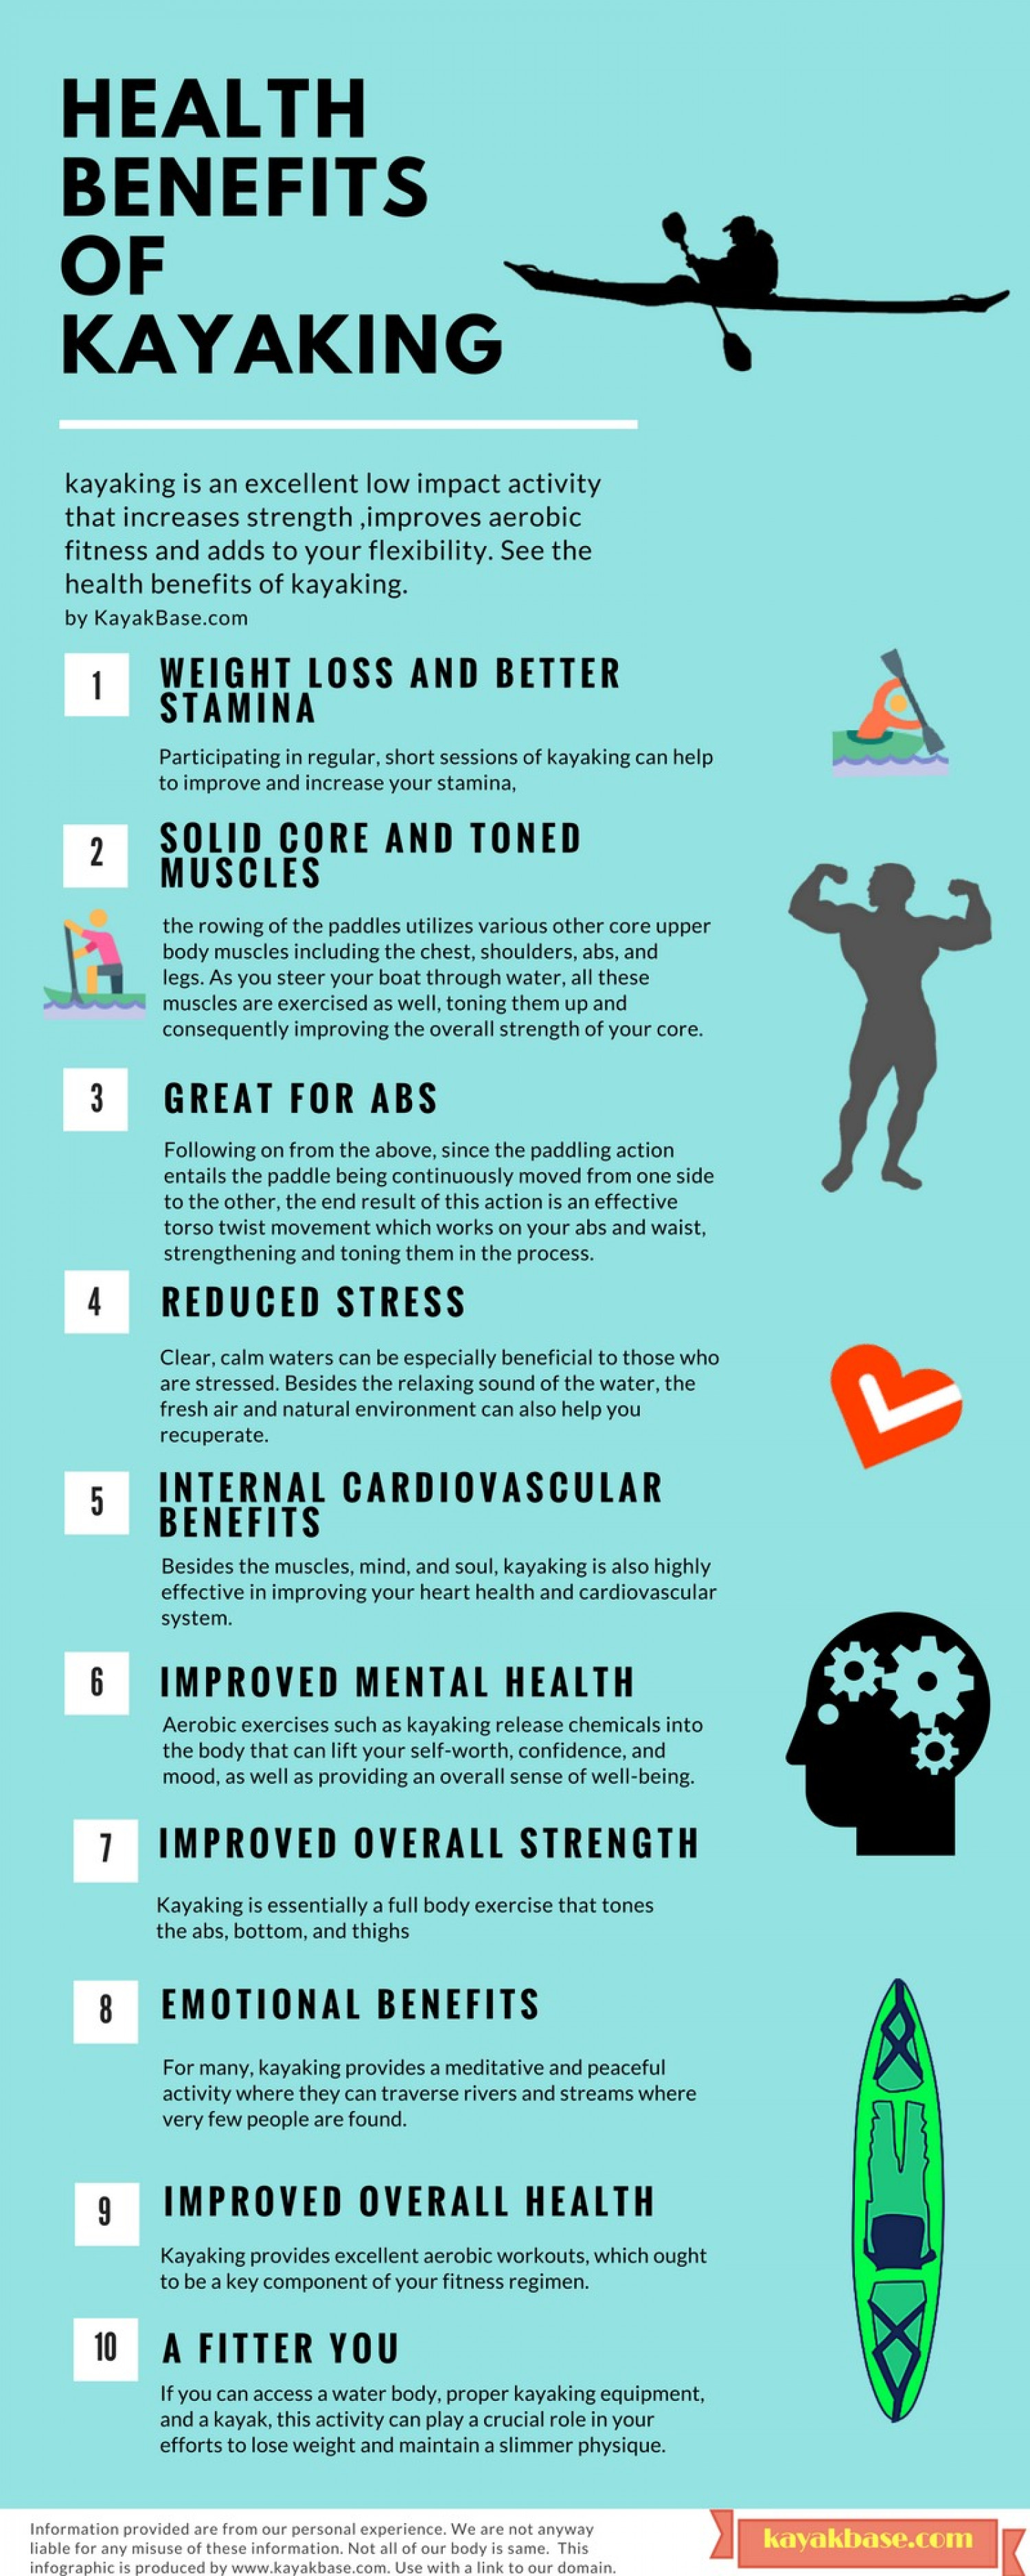 10 Health Benefits of Kayaking and Canoeing Infographic